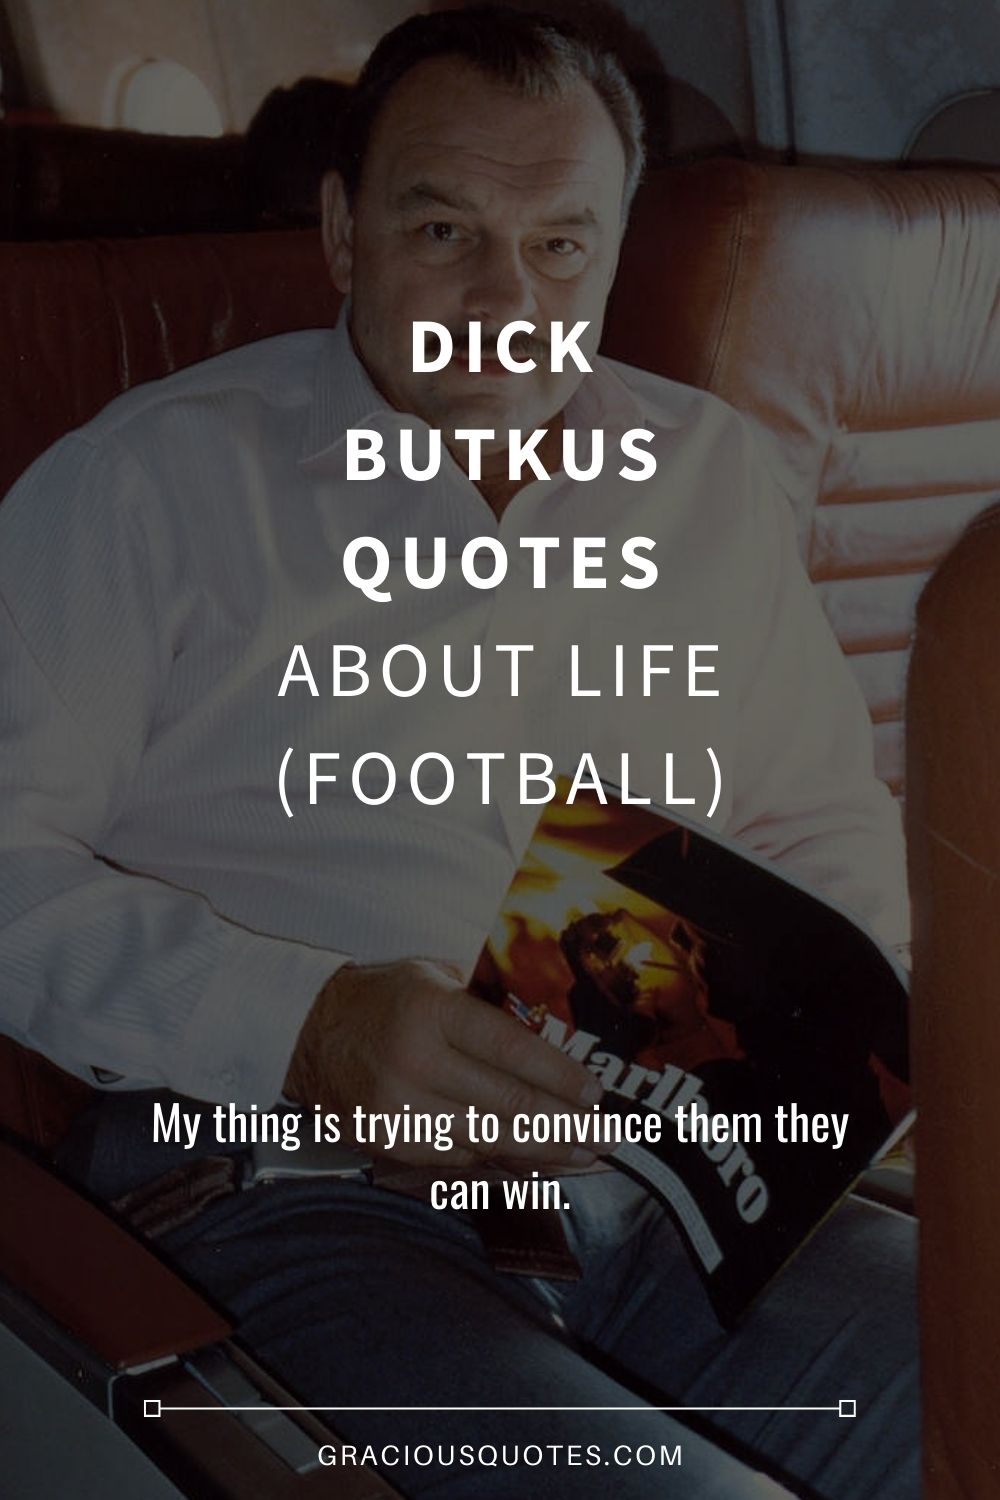 Dick Butkus Quotes About Life (FOOTBALL) - Gracious Quotes